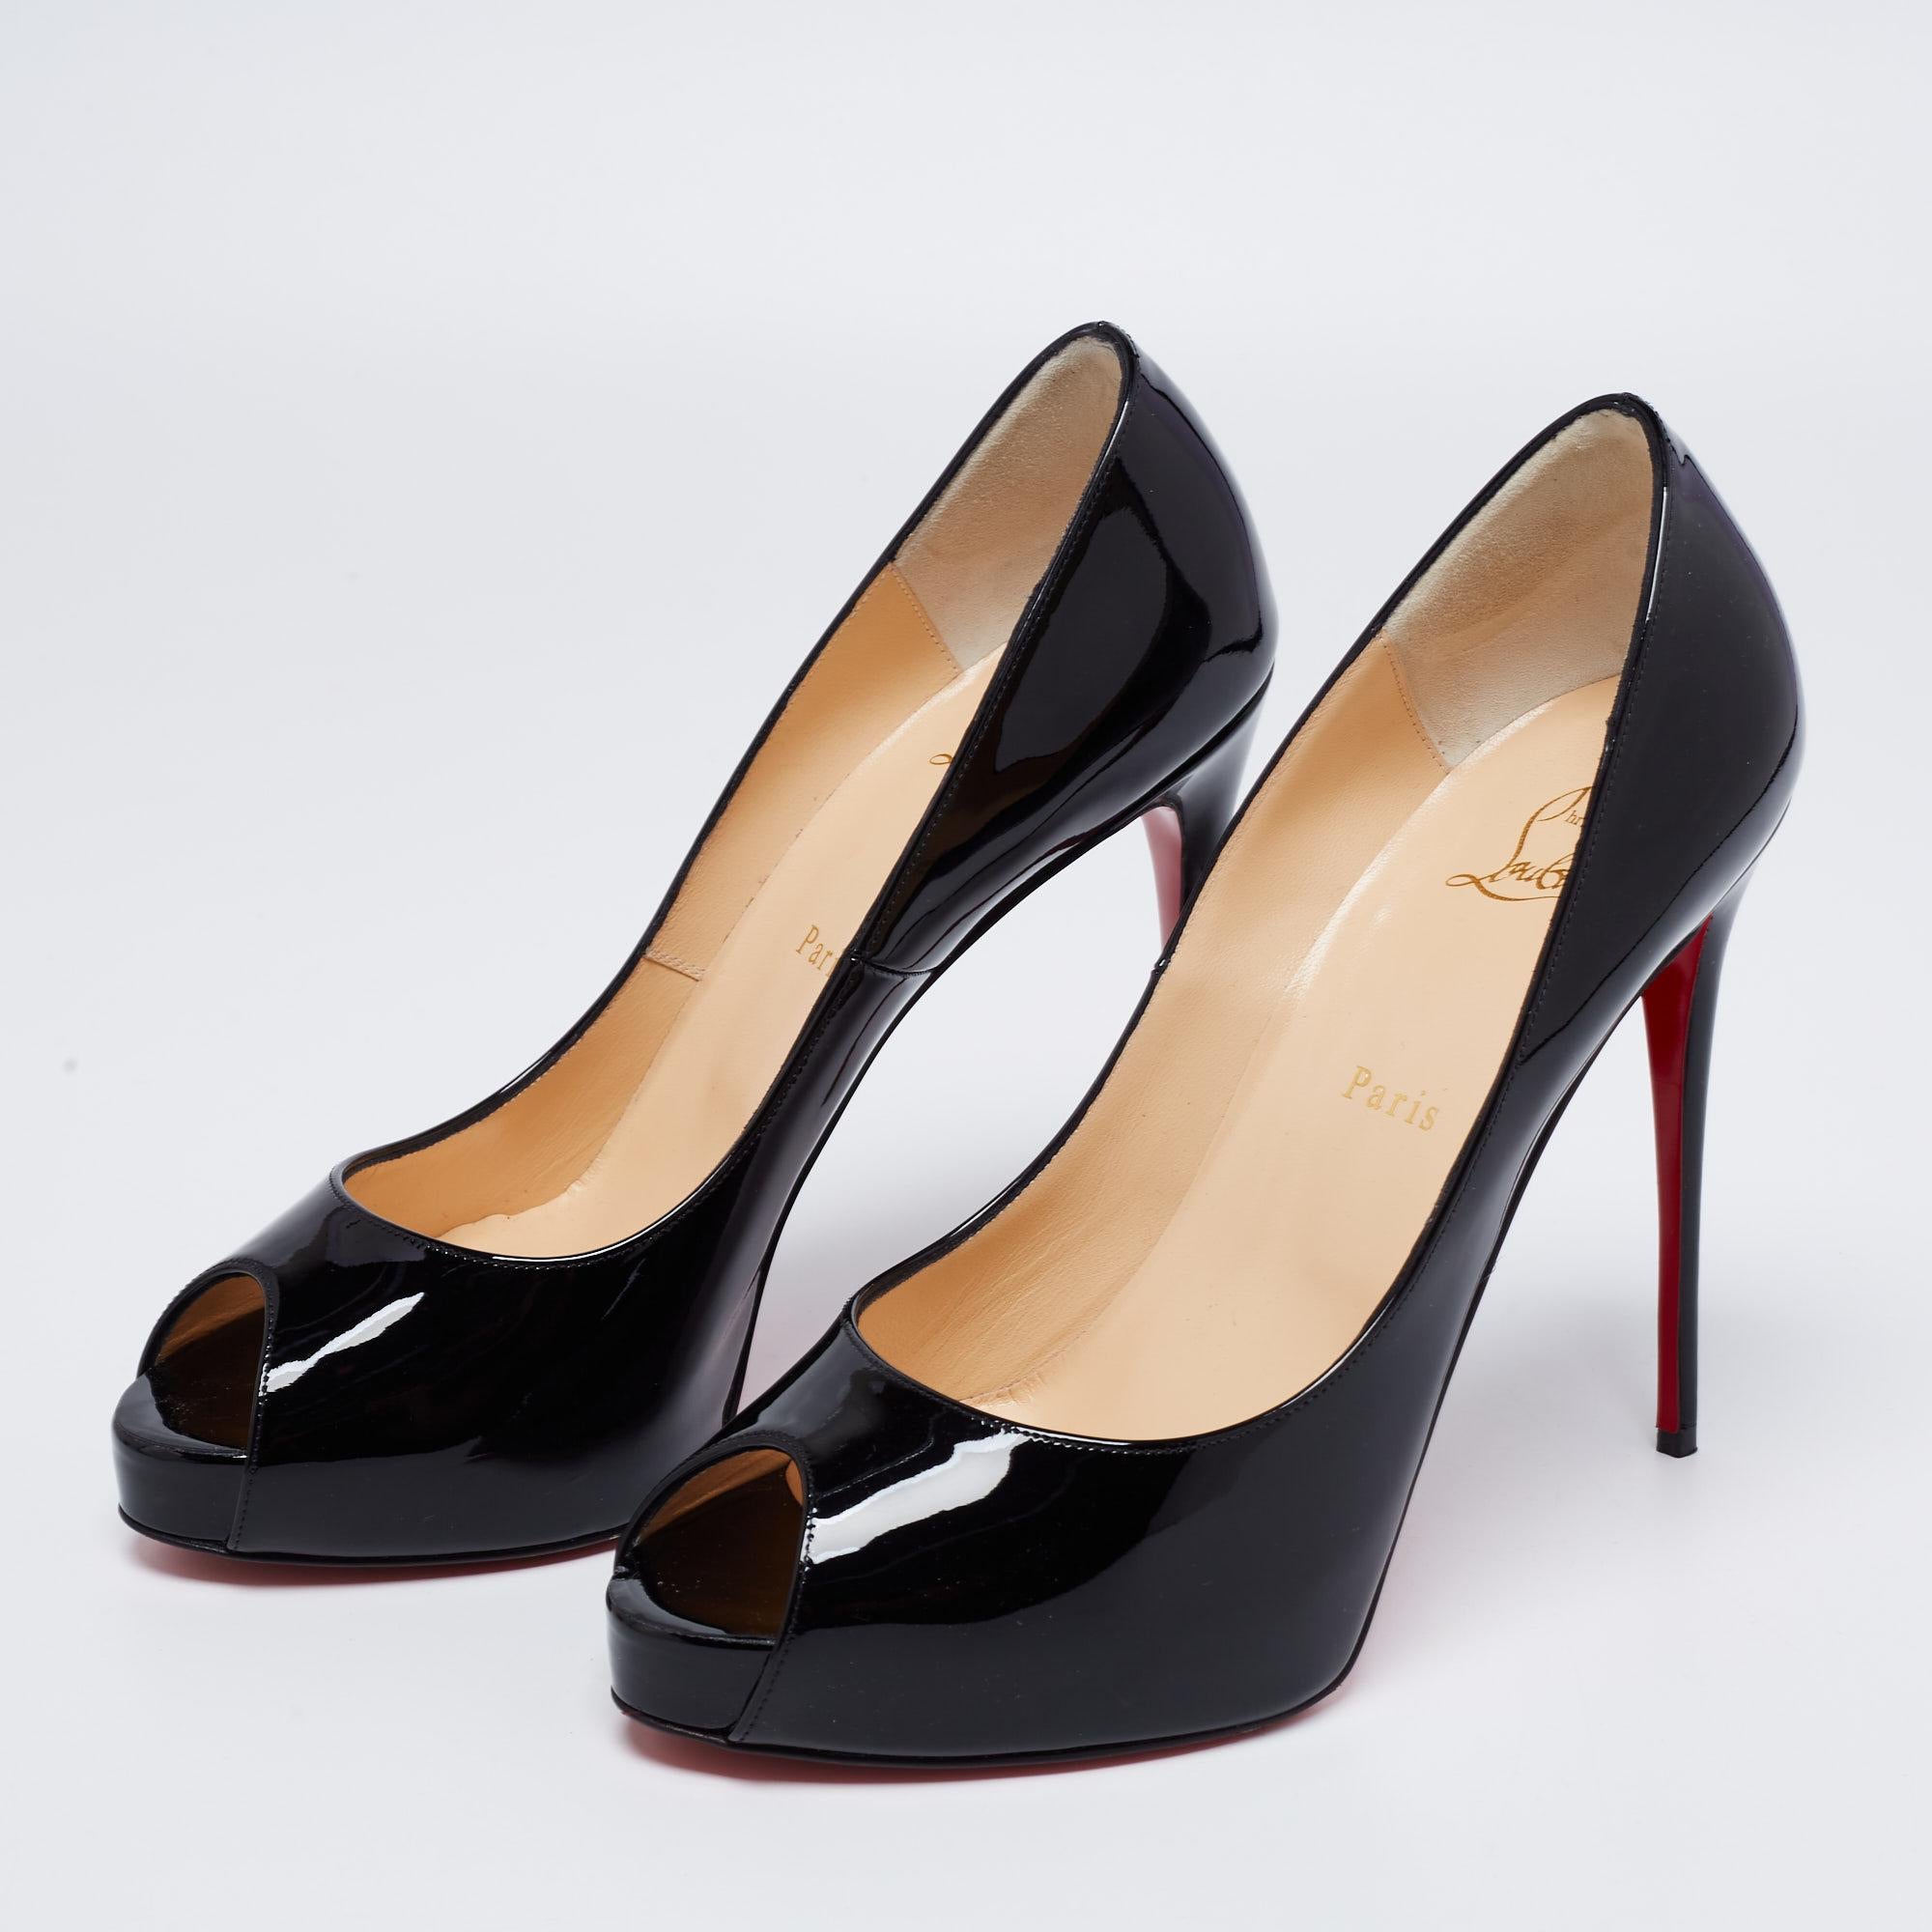 Christian Louboutin yet again brings a stunning set of pumps that makes us marvel at its beauty and craftsmanship. With the curvaceous arch that ultimately forms into a peep-toe silhouette, they will give an illusion of elongated feet to the wearer.